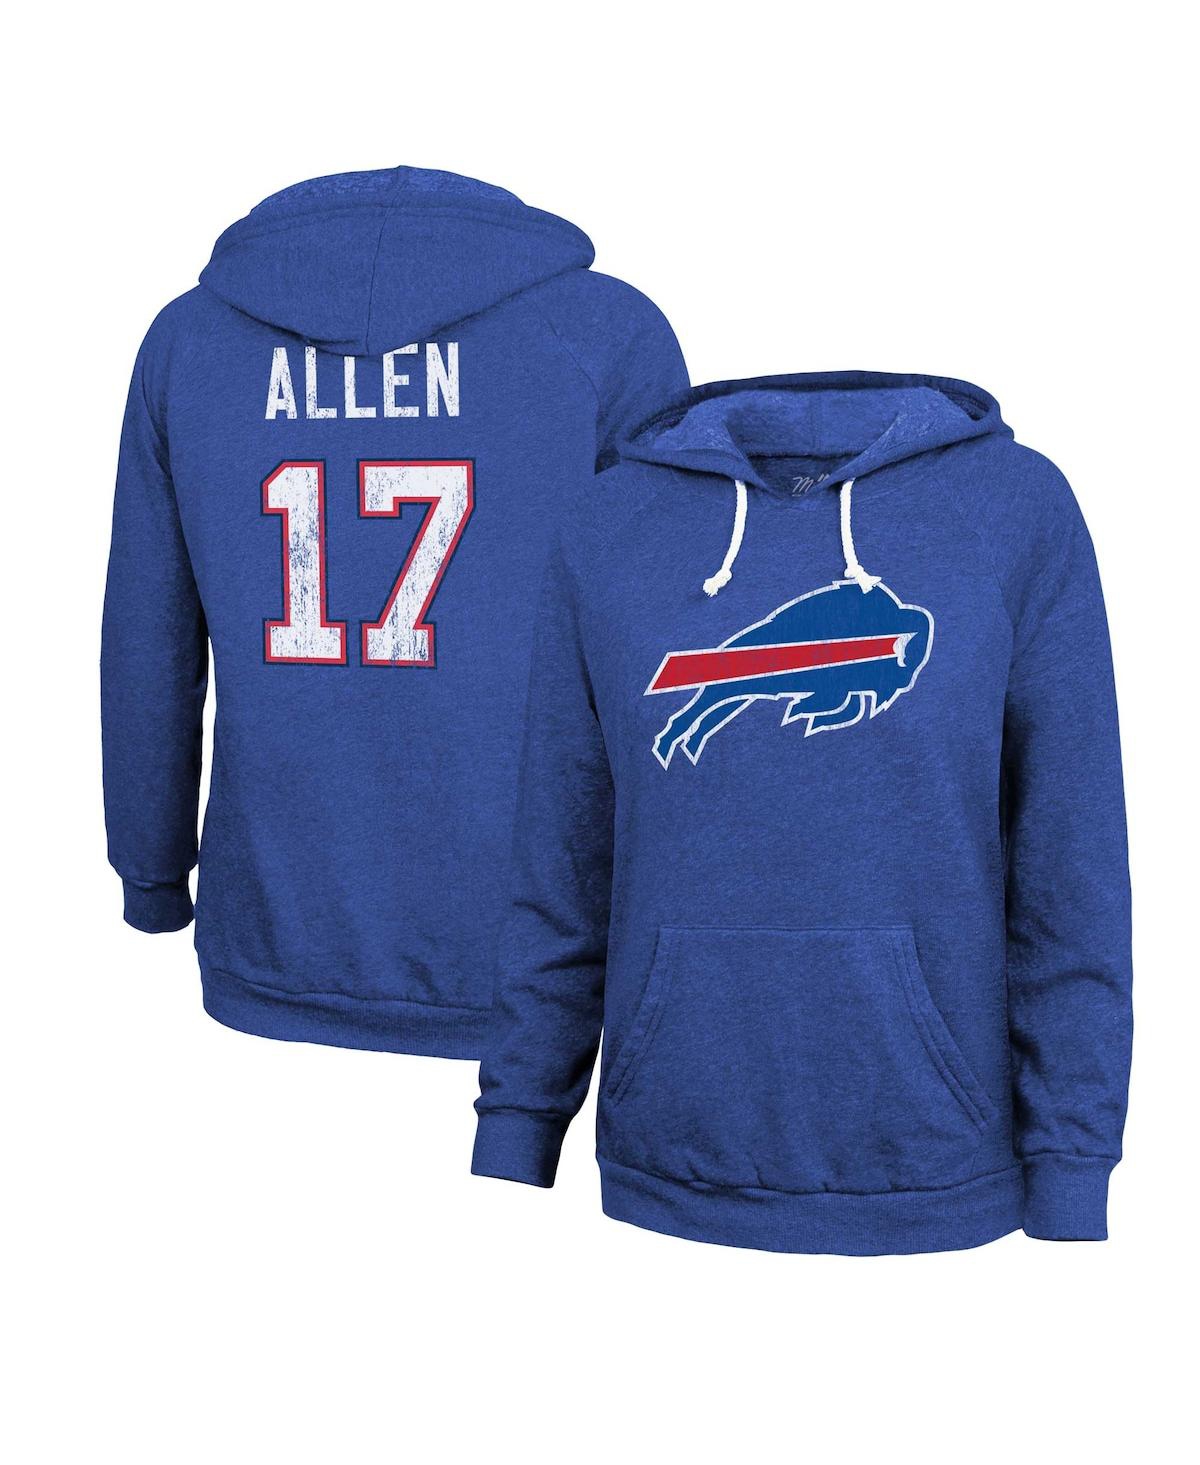 Women's Majestic Threads Josh Allen Royal Distressed Buffalo Bills Name and Number Pullover Hoodie - Royal